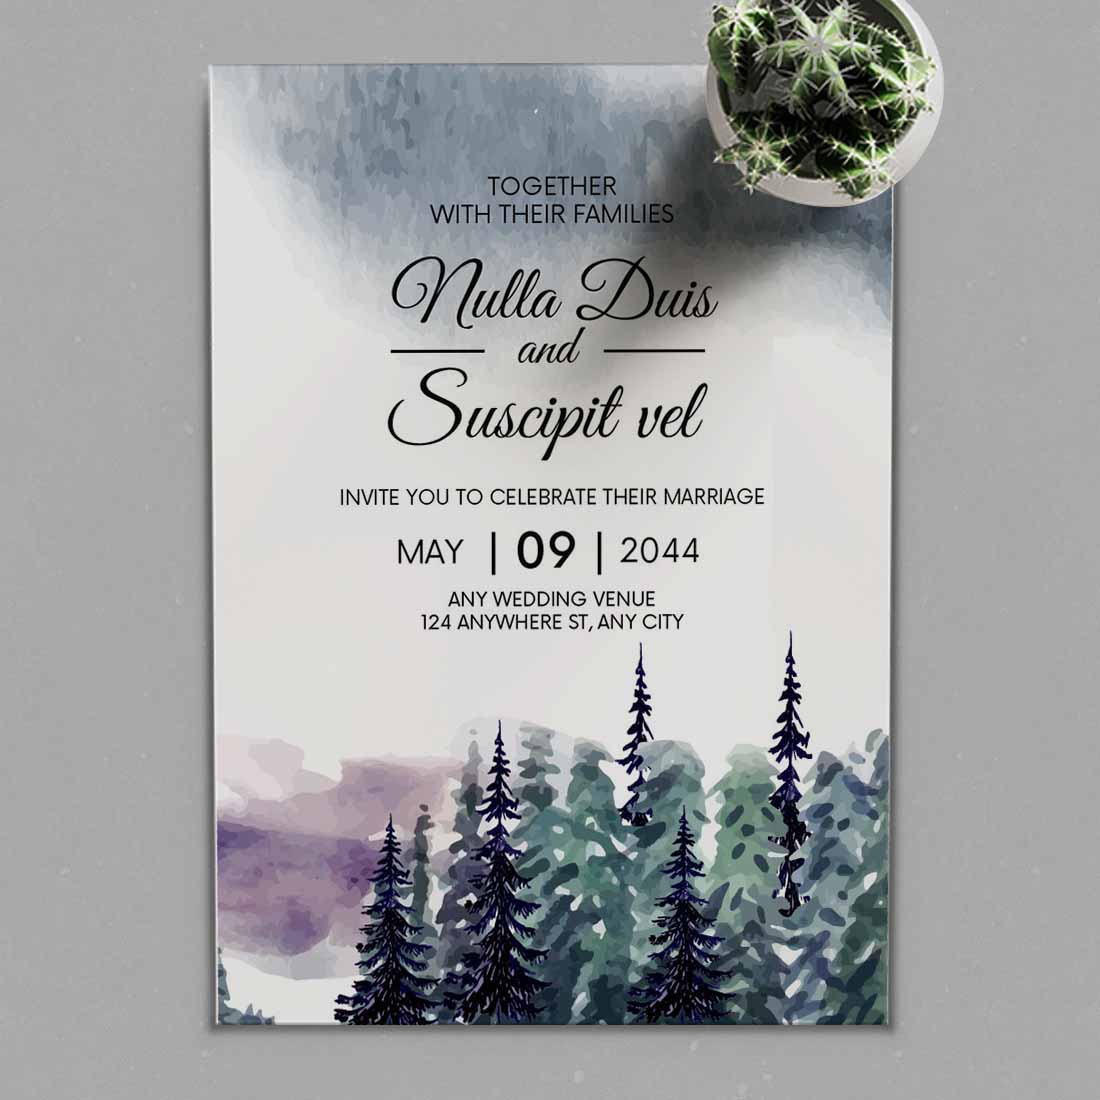 Winter Wedding Card With Pine Trees main cover.